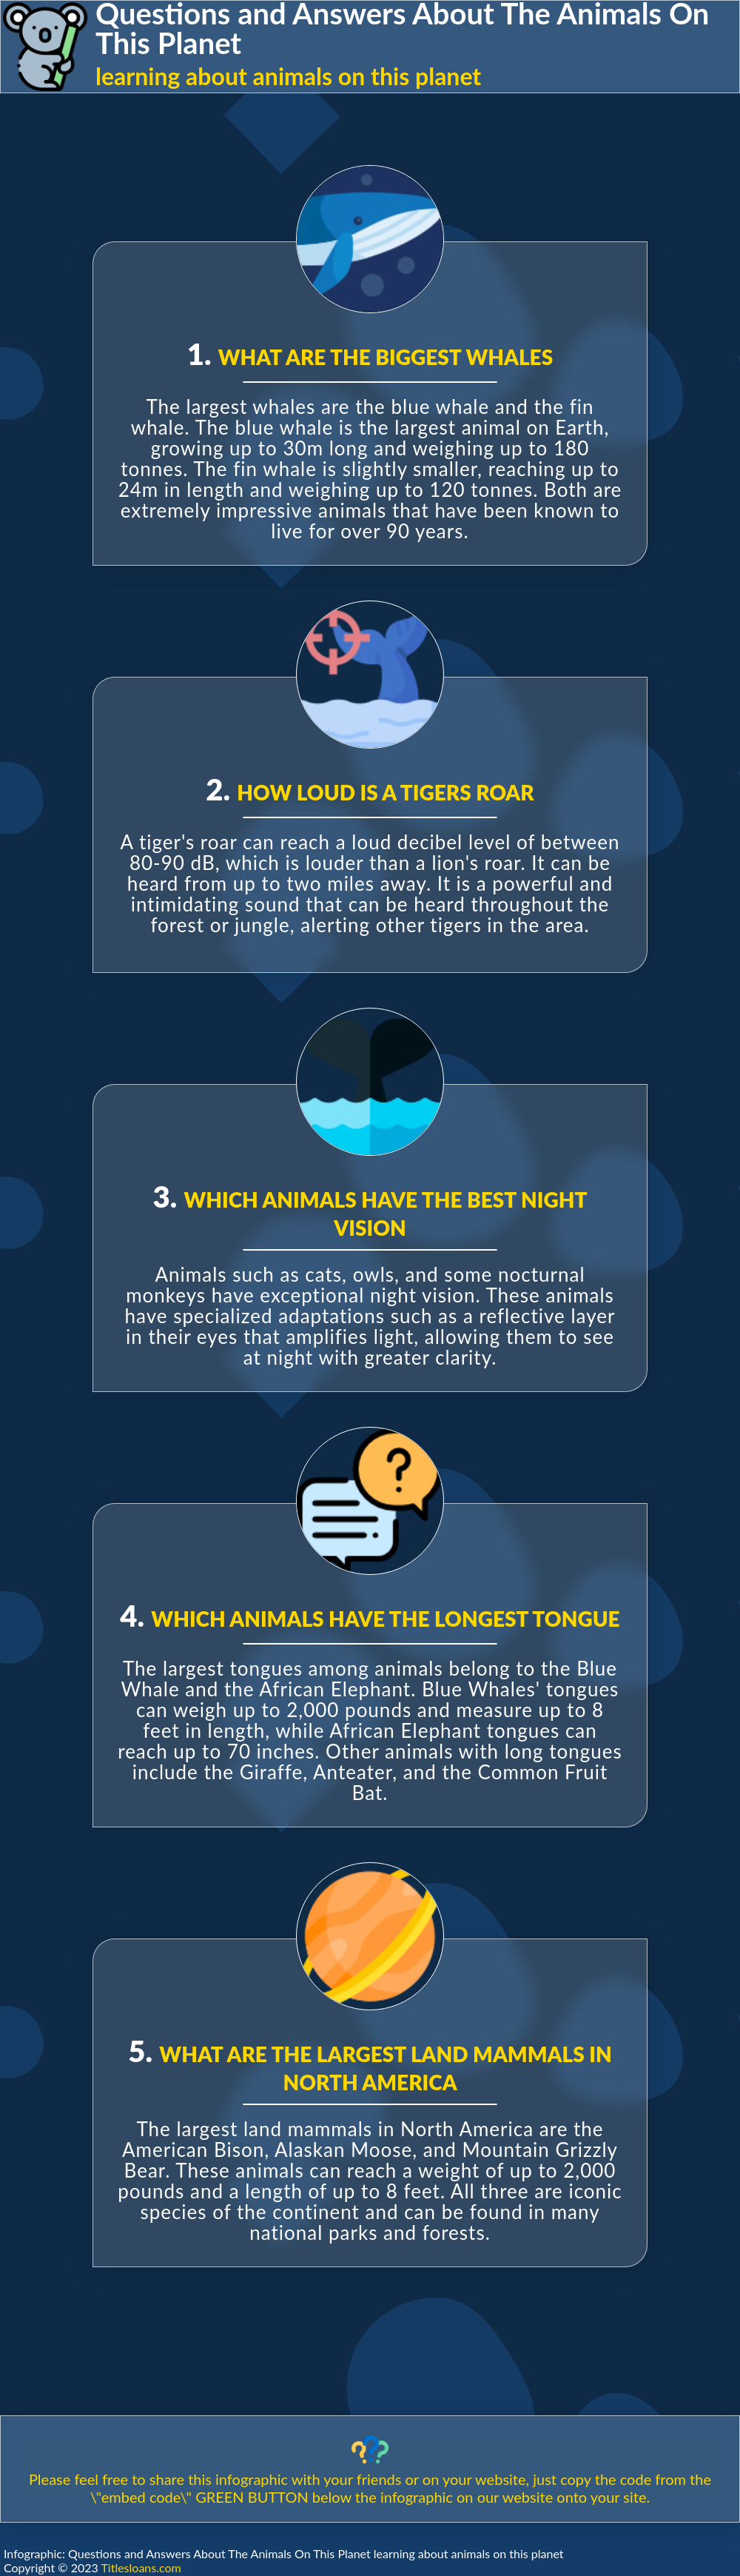 Infographic: Questions and Answers About The Animals On This Planet learning about animals on this planet